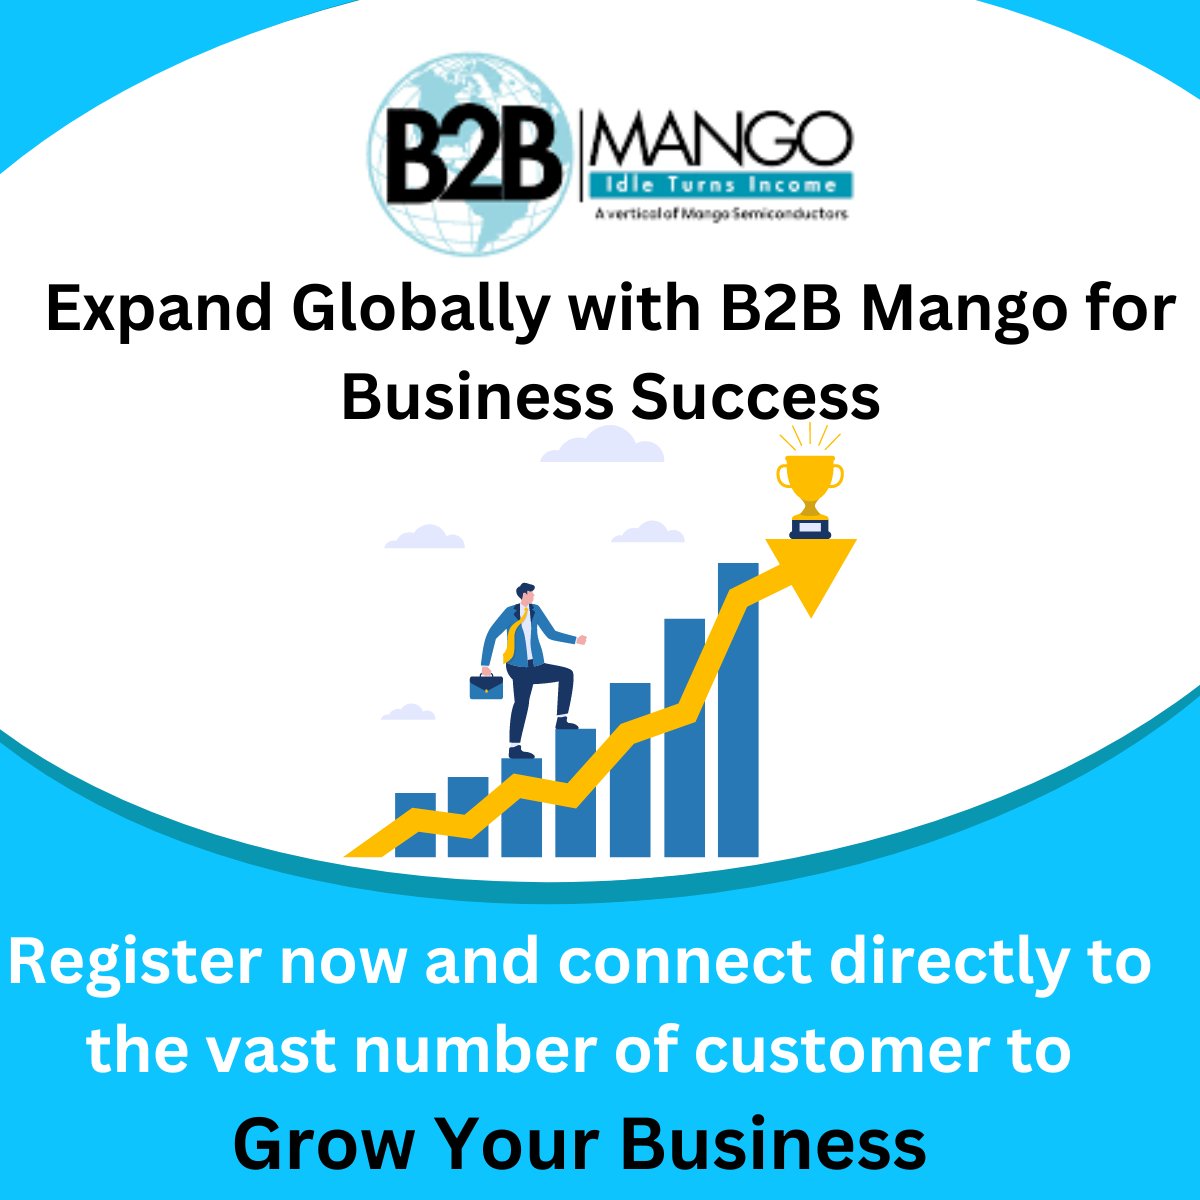 𝗥𝗲𝗮𝗱𝘆 𝘁𝗼 𝘁𝗮𝗸𝗲 𝘆𝗼𝘂𝗿 𝗯𝘂𝘀𝗶𝗻𝗲𝘀𝘀 𝘁𝗼 𝗻𝗲𝘄 𝗵𝗲𝗶𝗴𝗵𝘁𝘀?🚀Join b2bmango.com as a seller and tap into global growth with B2B Mango! Connect directly to a vast customer base!

#B2BMango #InventoryManagement #BusinessGrowth #GrowYourBusiness